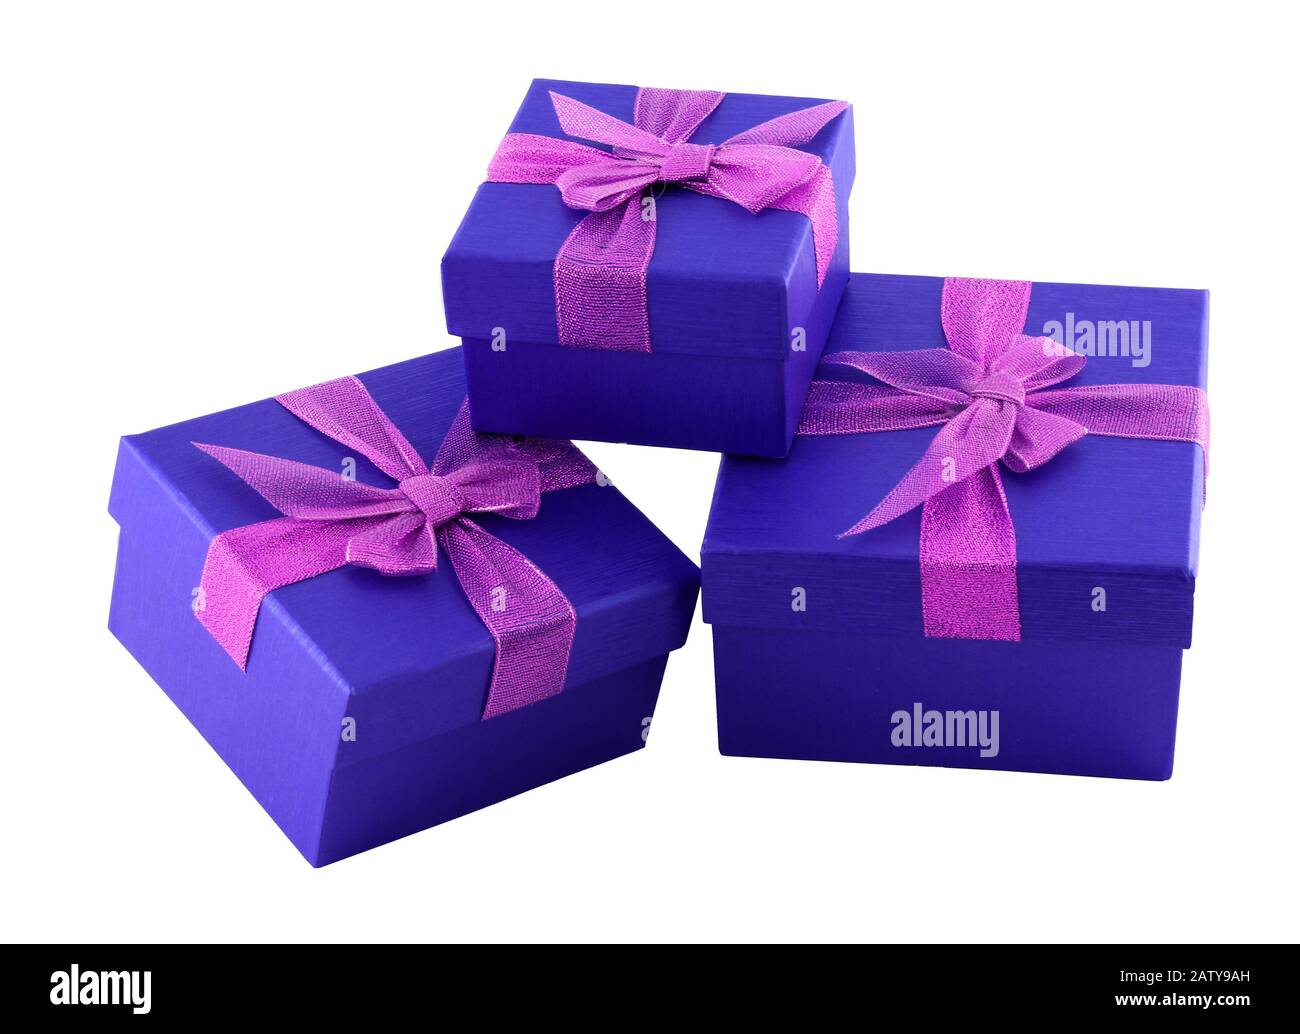 Miniature Wrapped Birthday Gifts or Presents 